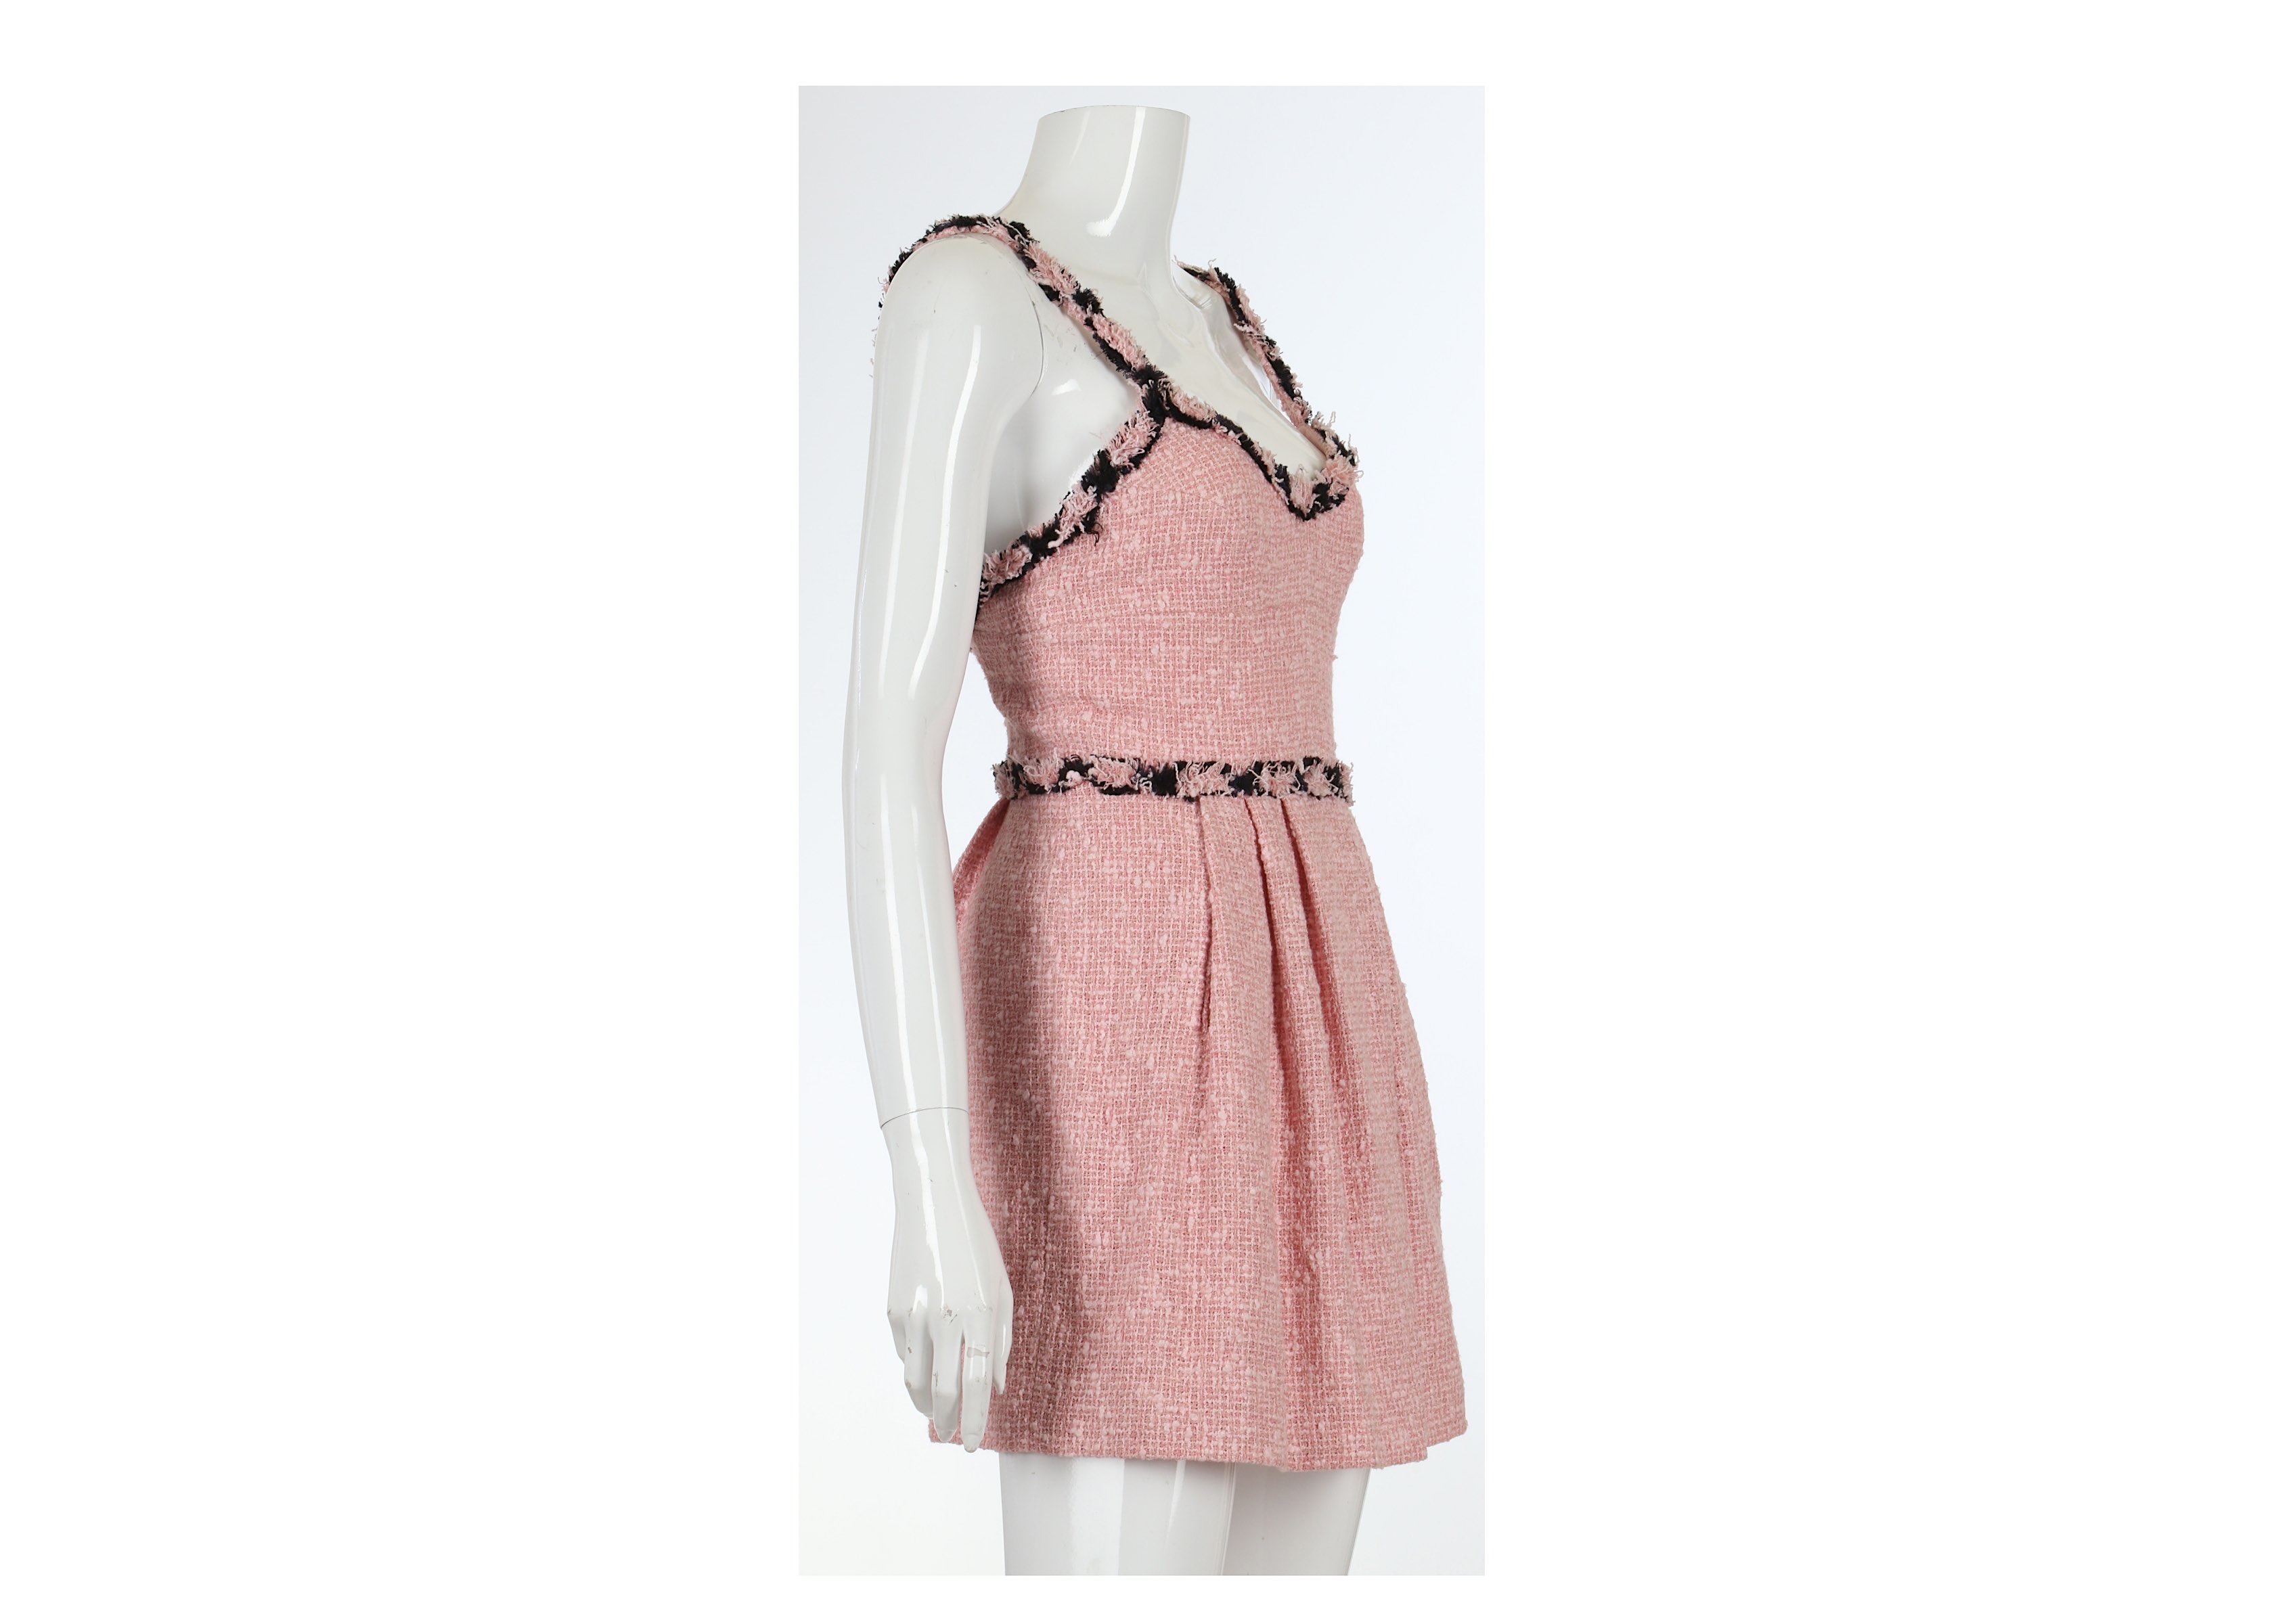 Chanel Pink and Black Boucle Mini Dress, Spring 2007, labelled size 36, 13"/34cm chest, 62cm long - Image 4 of 6